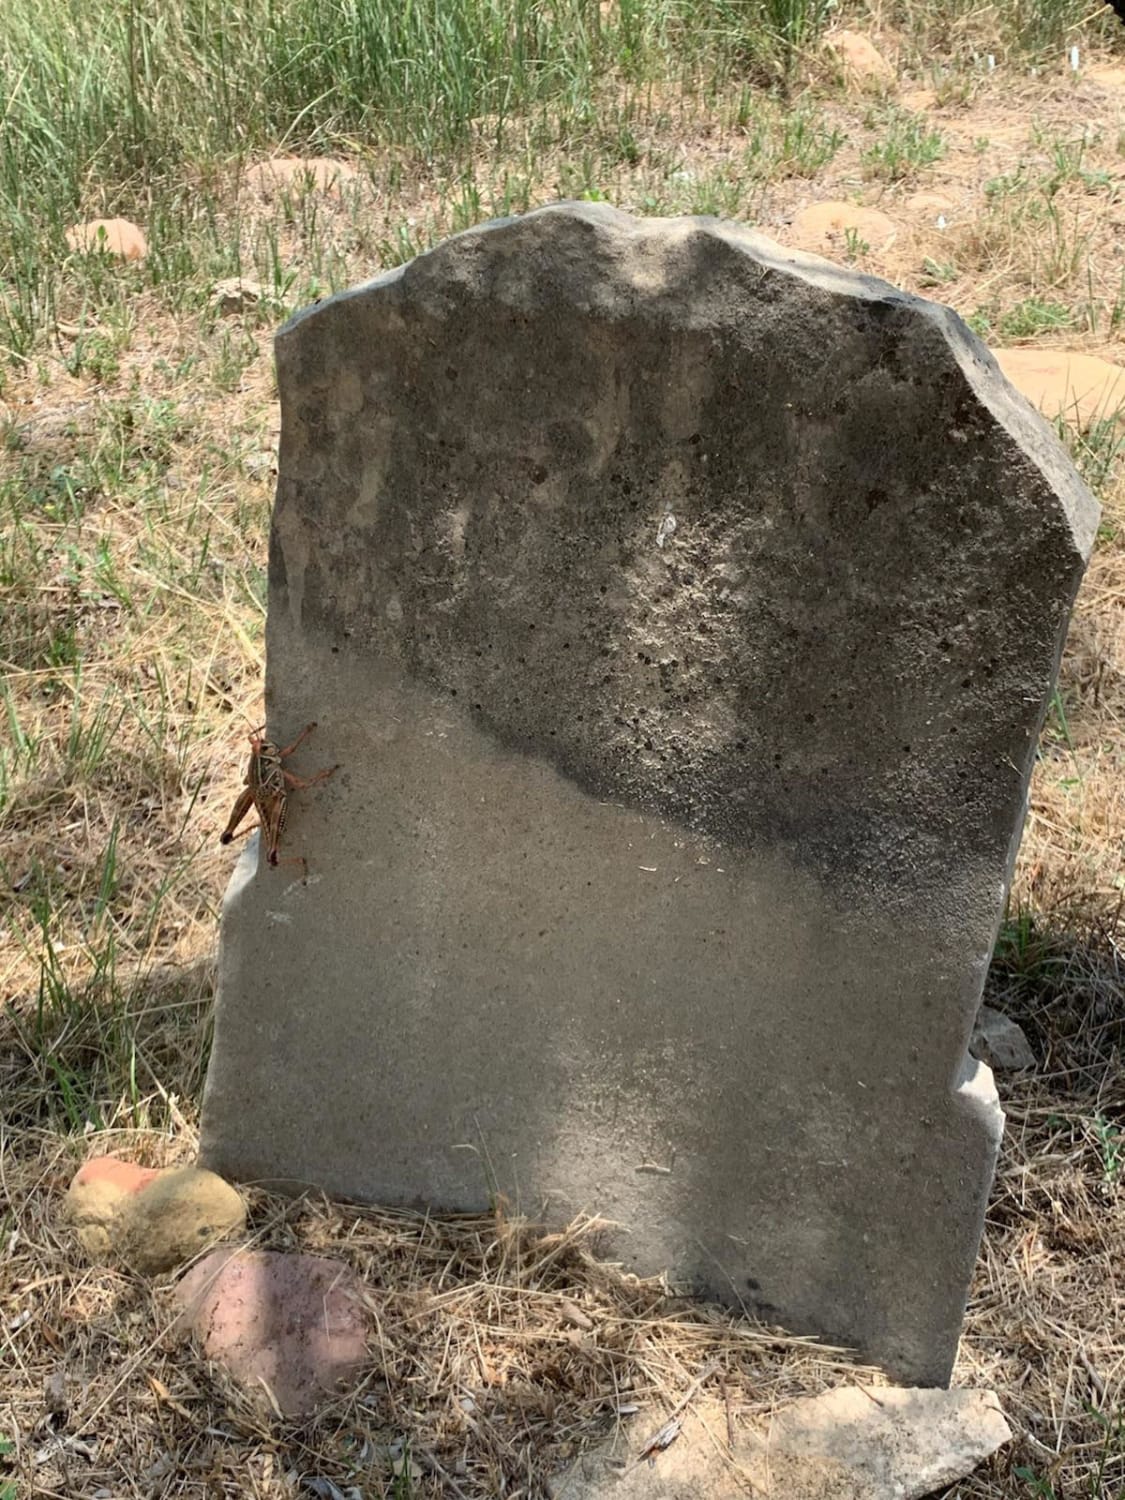 Found what looks to be an old tombstone on our ranch in Throckmorton, Texas. What are the chances this is a natural occurrence vs man made.